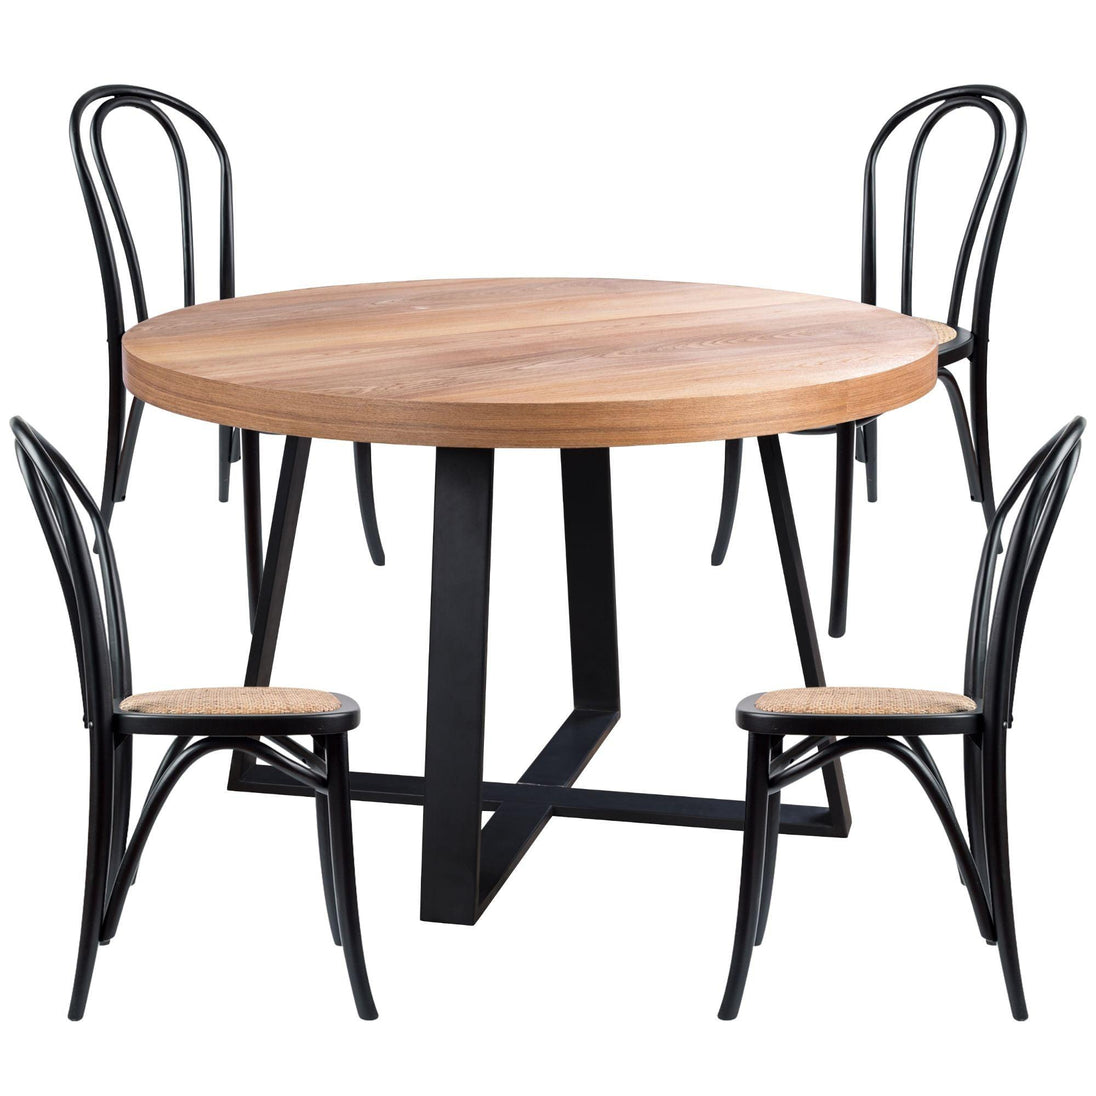 Buy Petunia 5pc 120cm Round Dining Table Set 4 Arched Back Chair Elm Timber Wood discounted | Products On Sale Australia